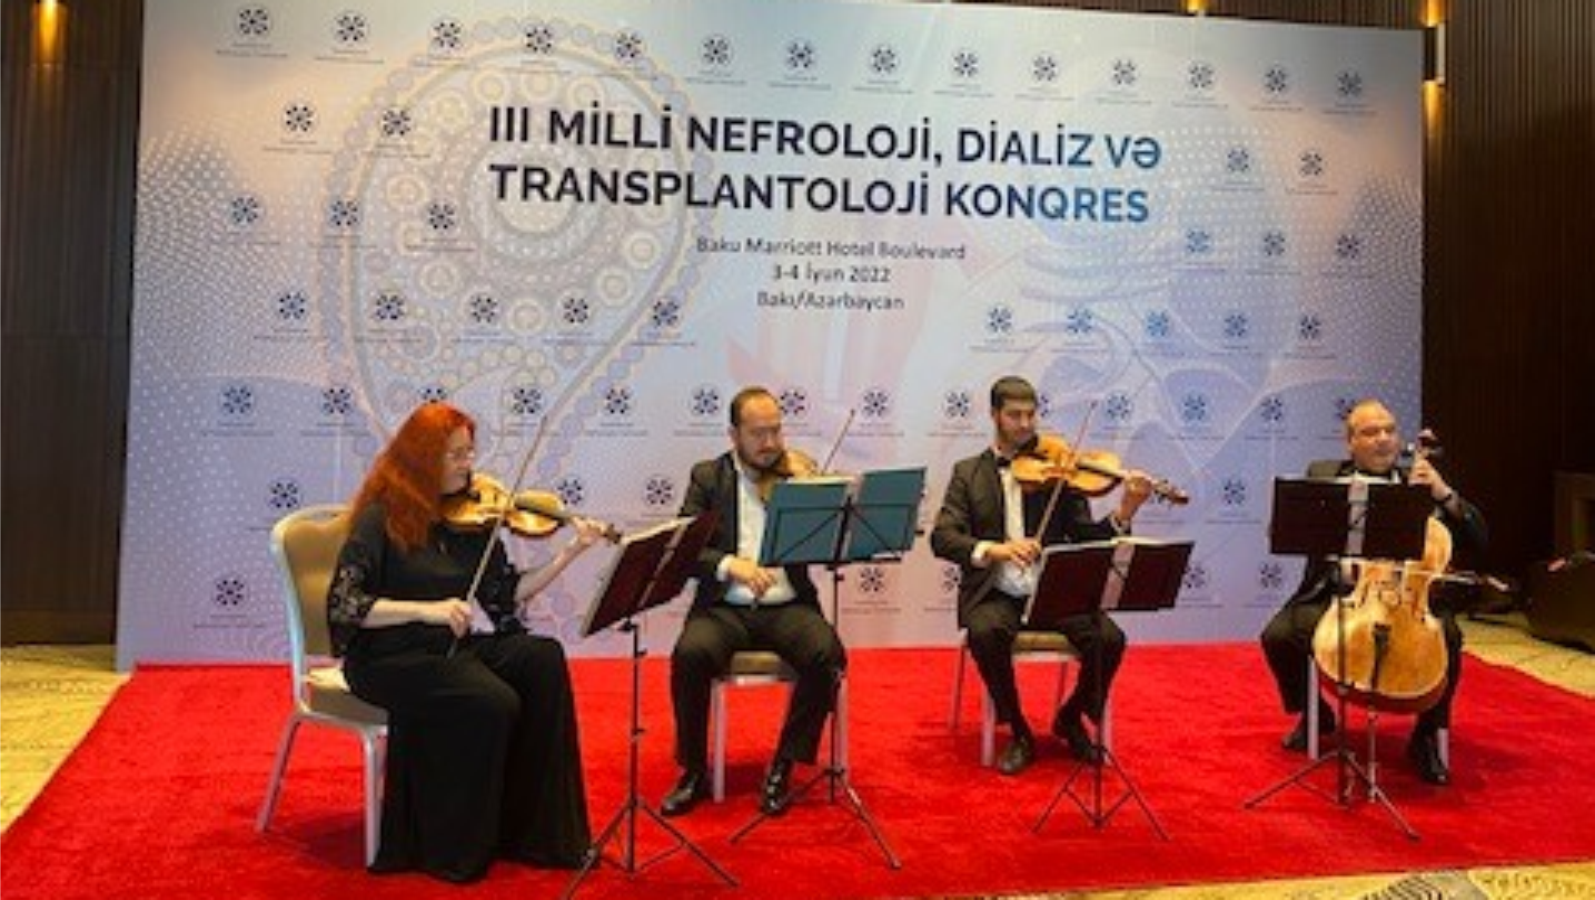 The III National Congress of Nephrology, Dialysis and Transplantology was held.